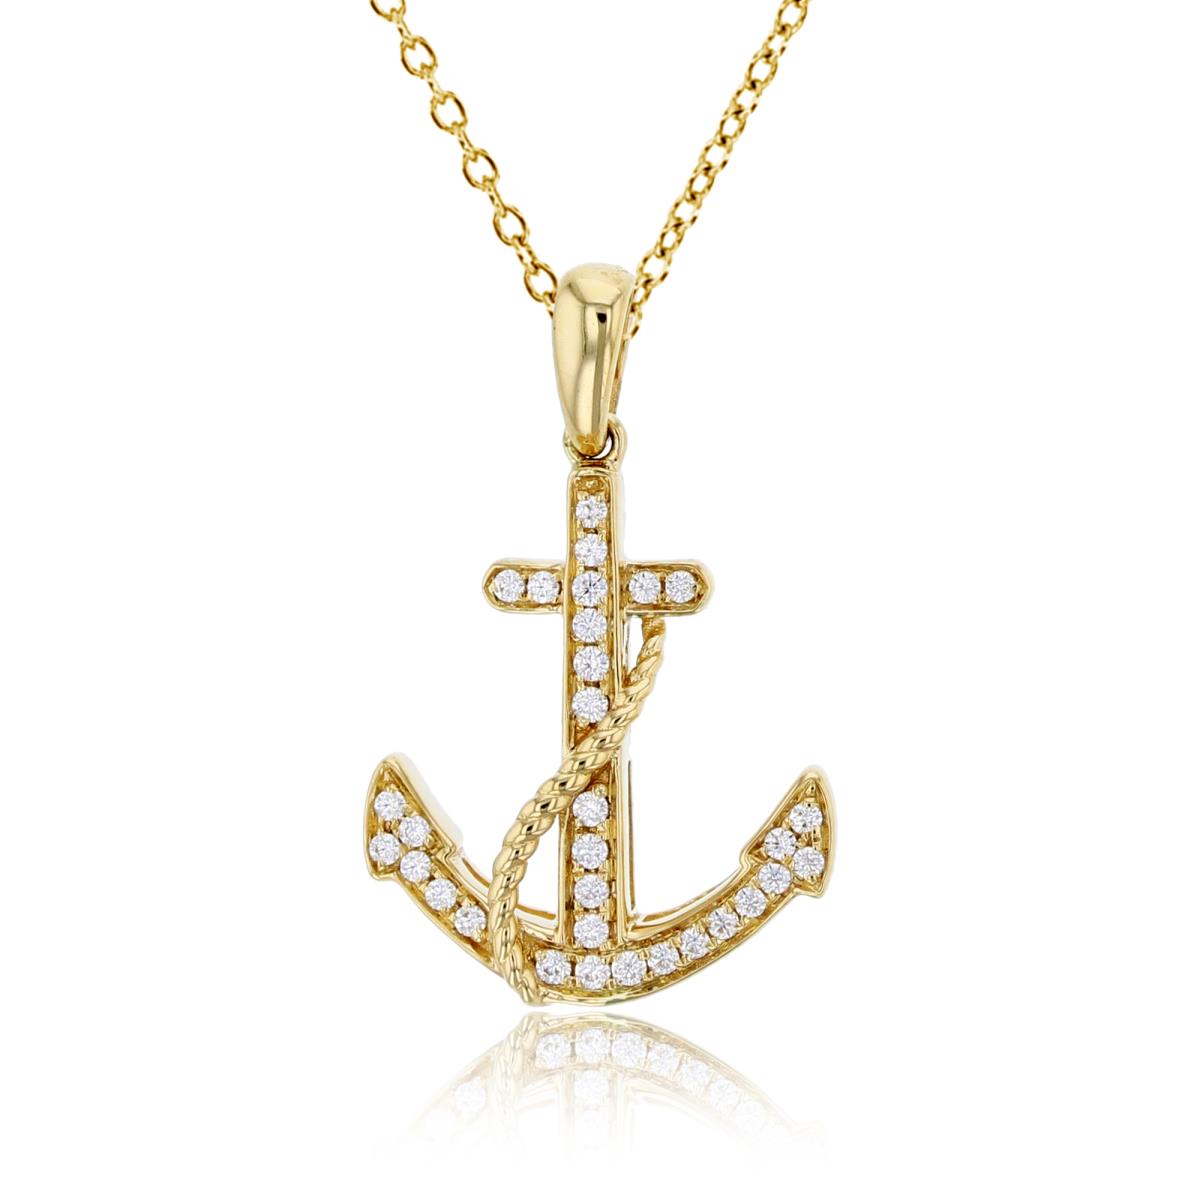 10K Yellow Gold 0.10cttw Rnd Diamonds Anchor 18"Necklace